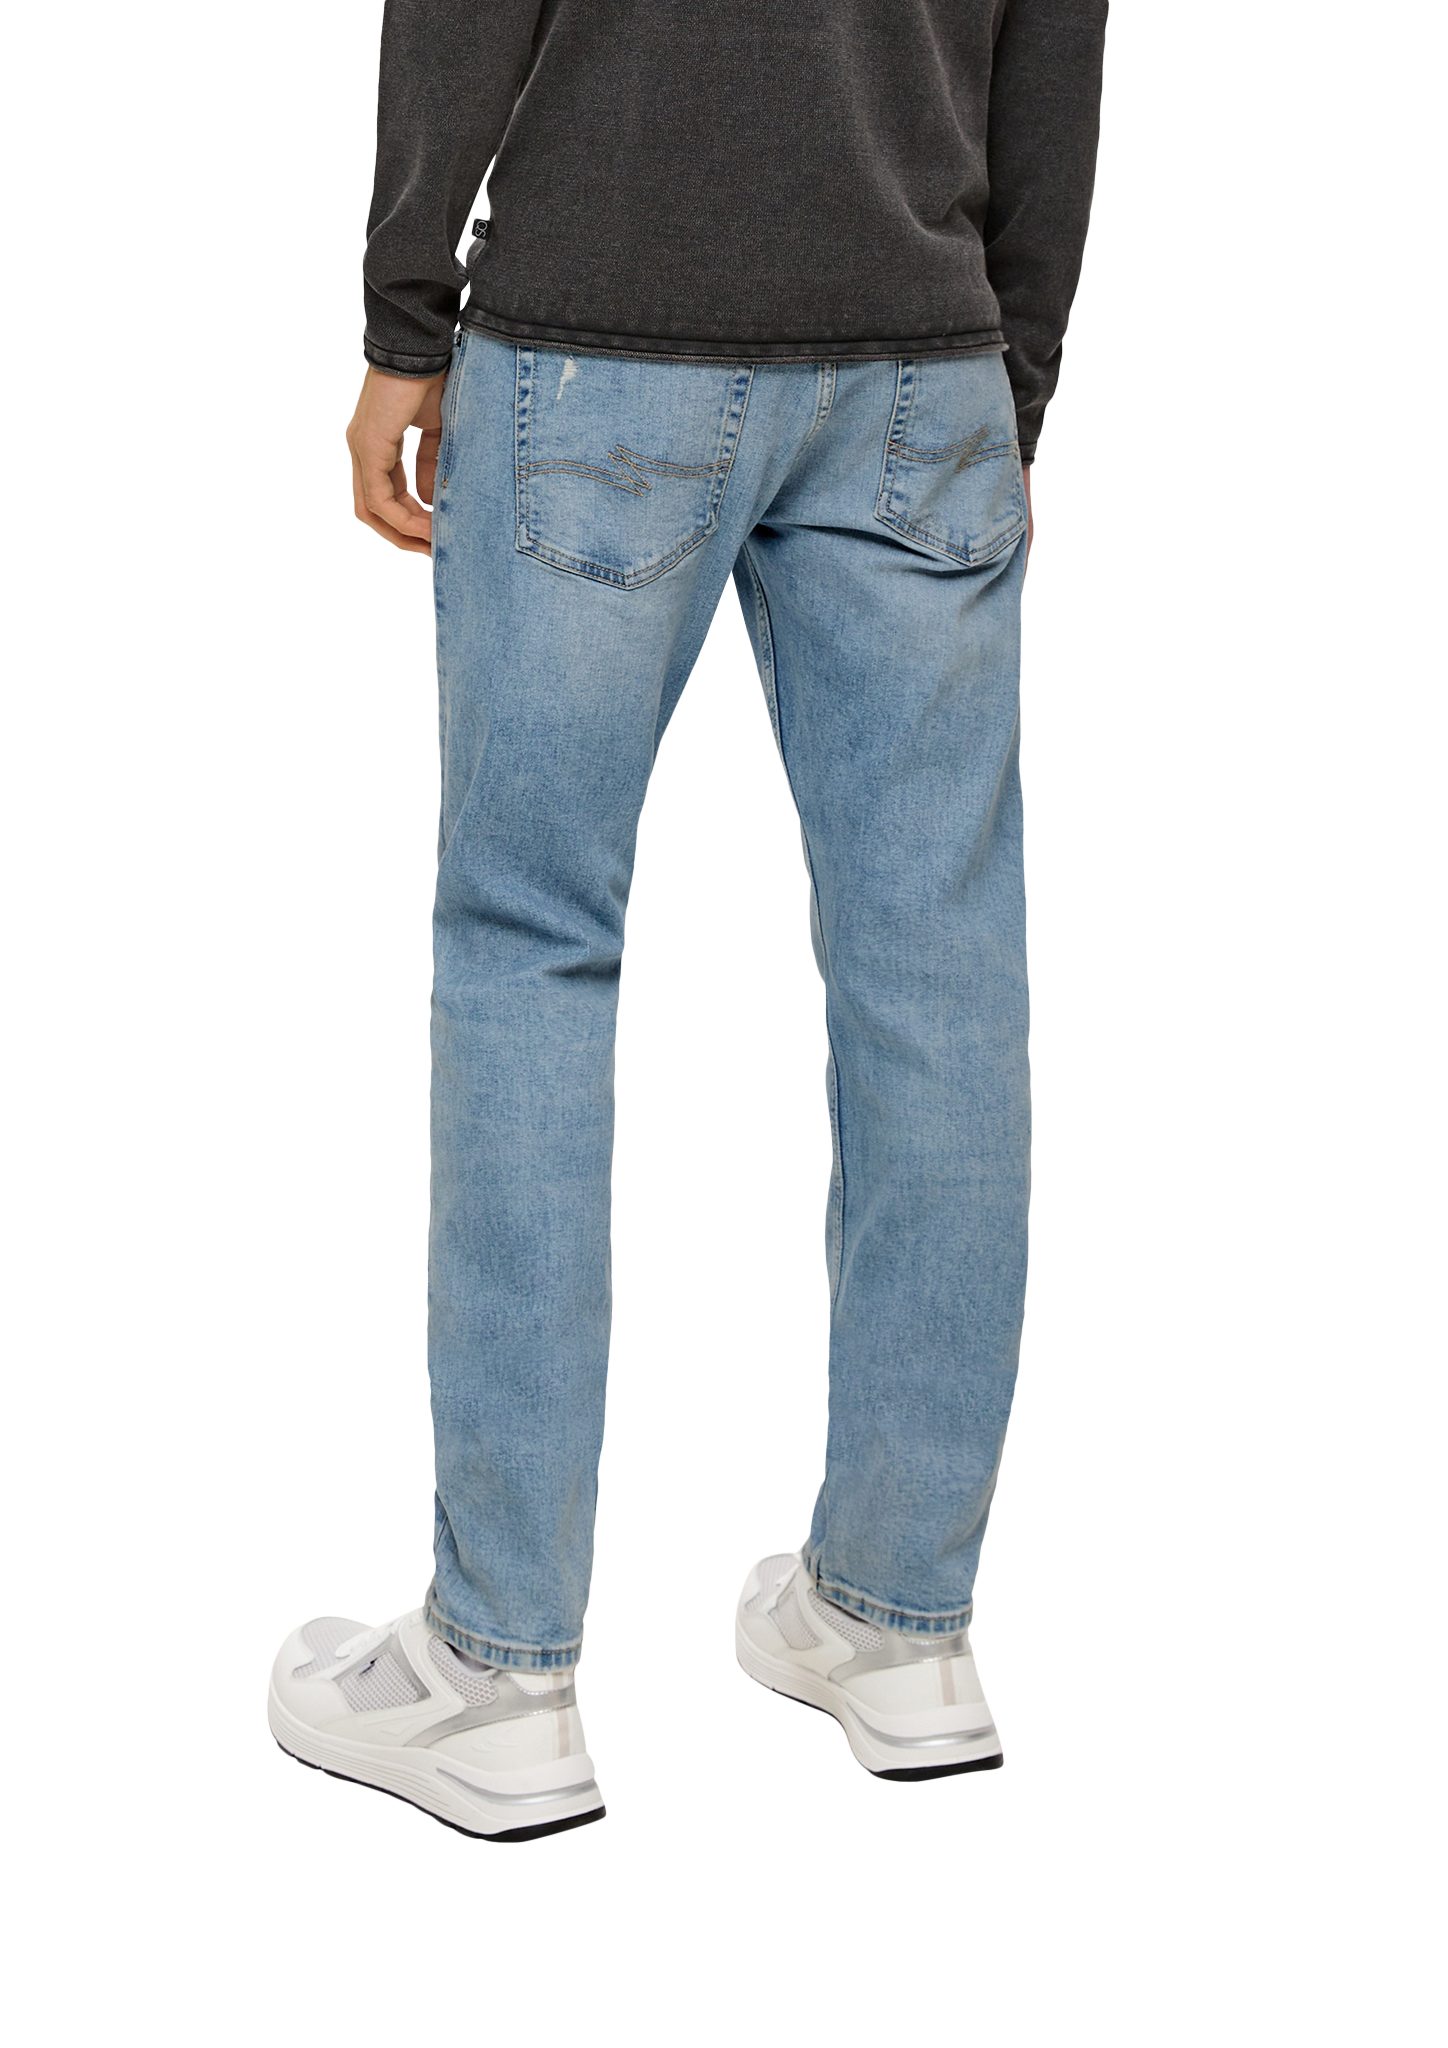 Waschung, Fit / QS / Jeans / Mid Slim Destroyes Rise Leg Rick Slim Stoffhose